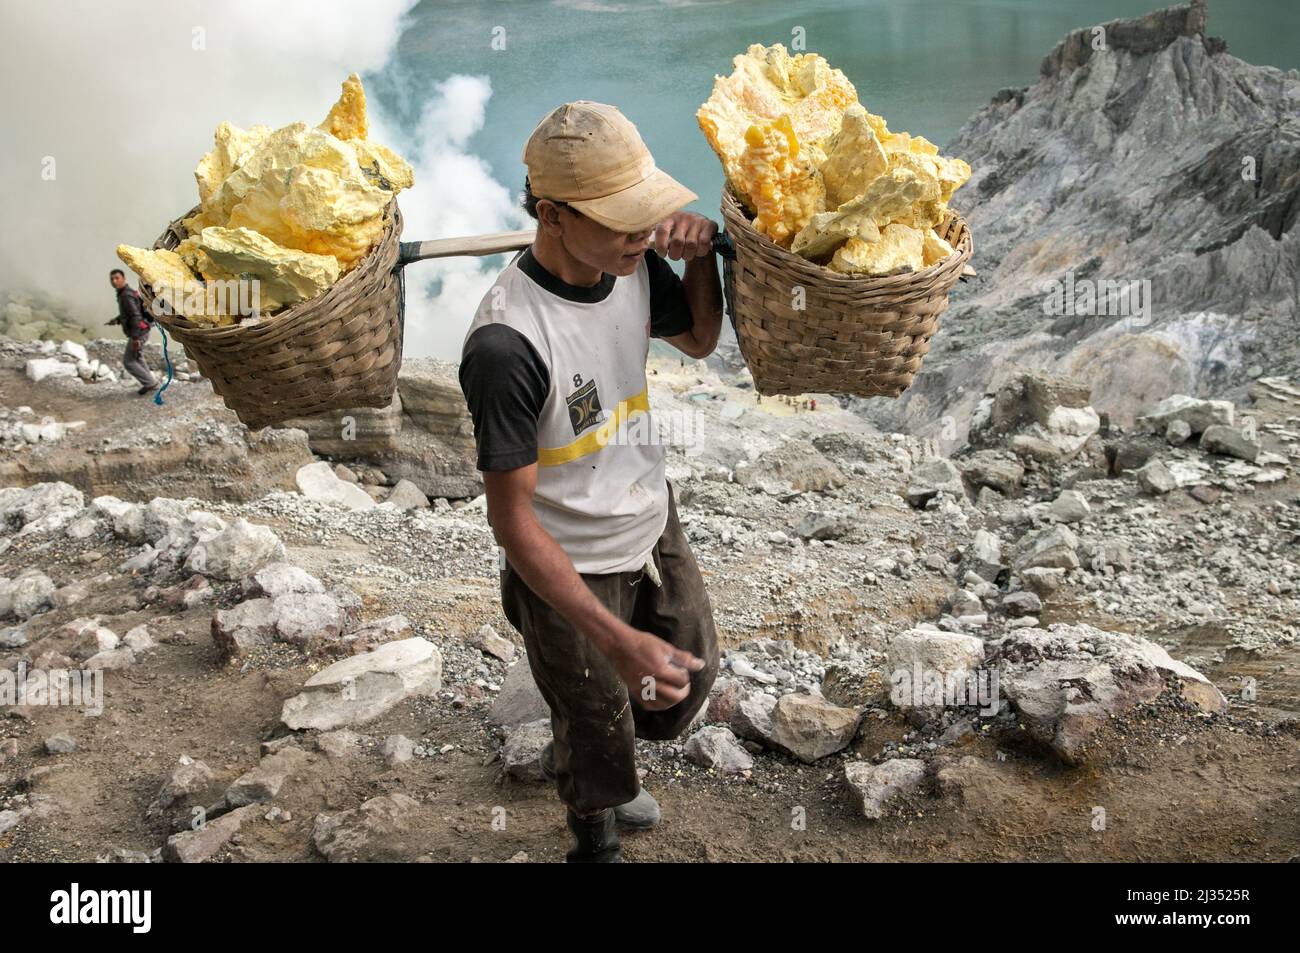 Porter carrying two baskets filled with sulfur from Ijen volcano crater, Java Island, Indonesia Stock Photo